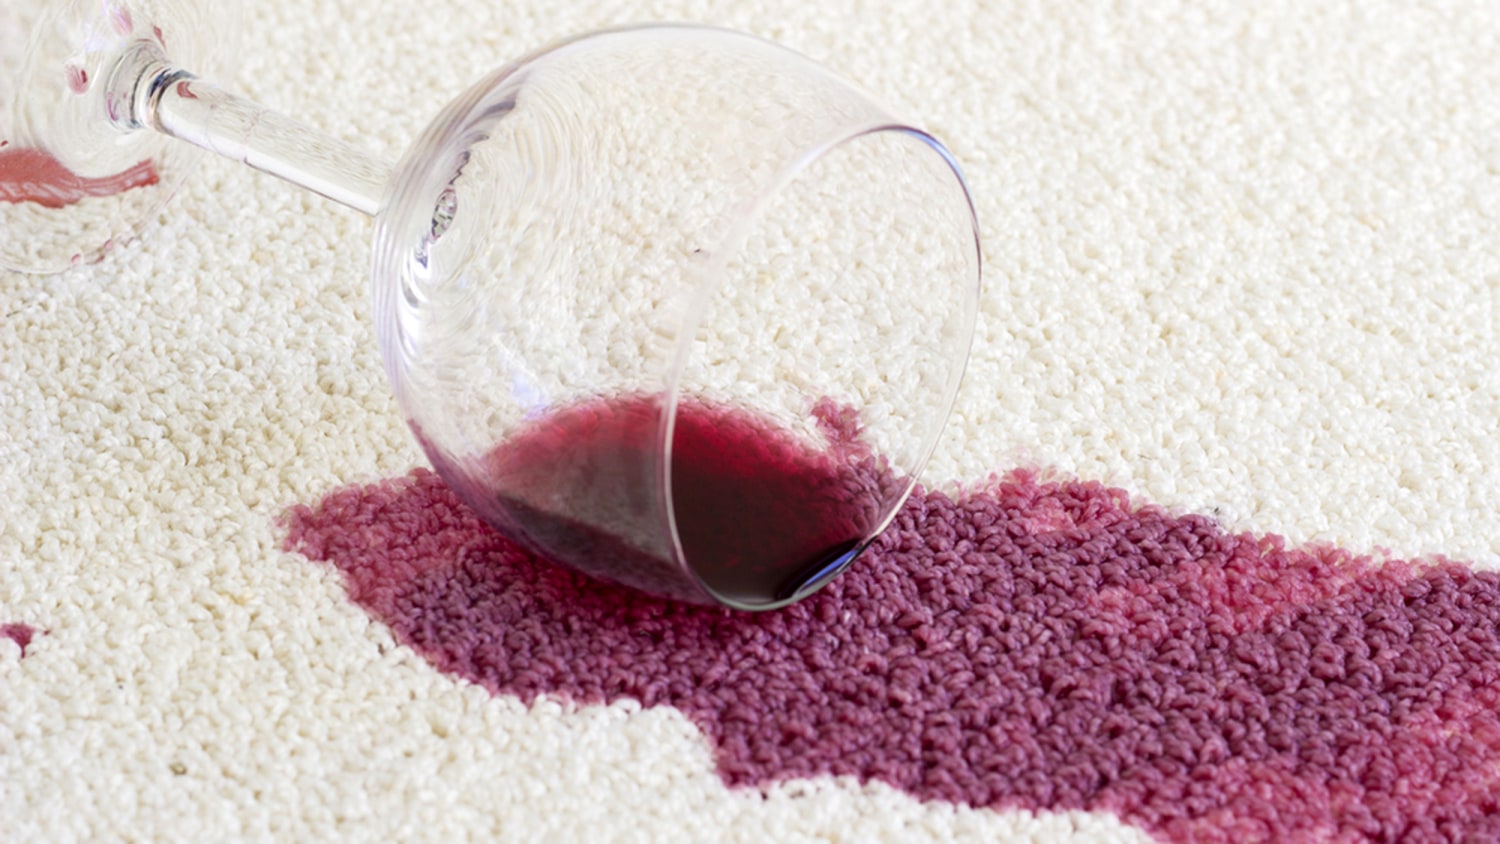 How To Remove Red Wine Stains From, Can You Get Red Wine Out Of Leather